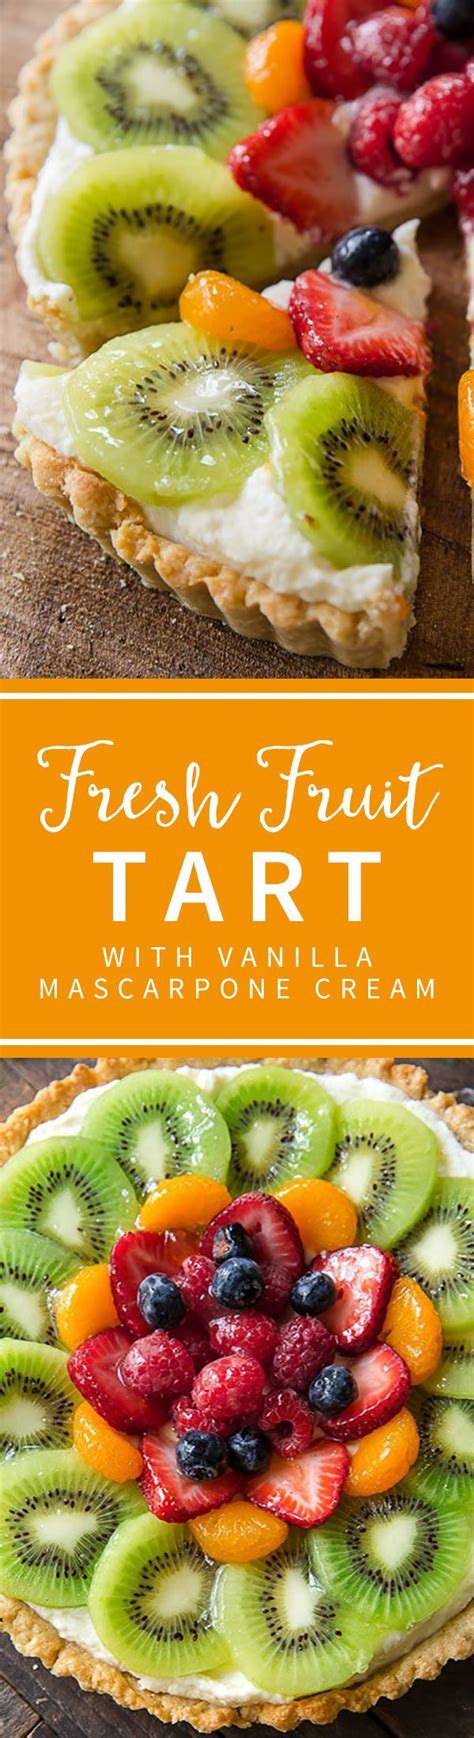 How To Make Homemade Fresh Fruit Tart With Buttery Pastry Crust And